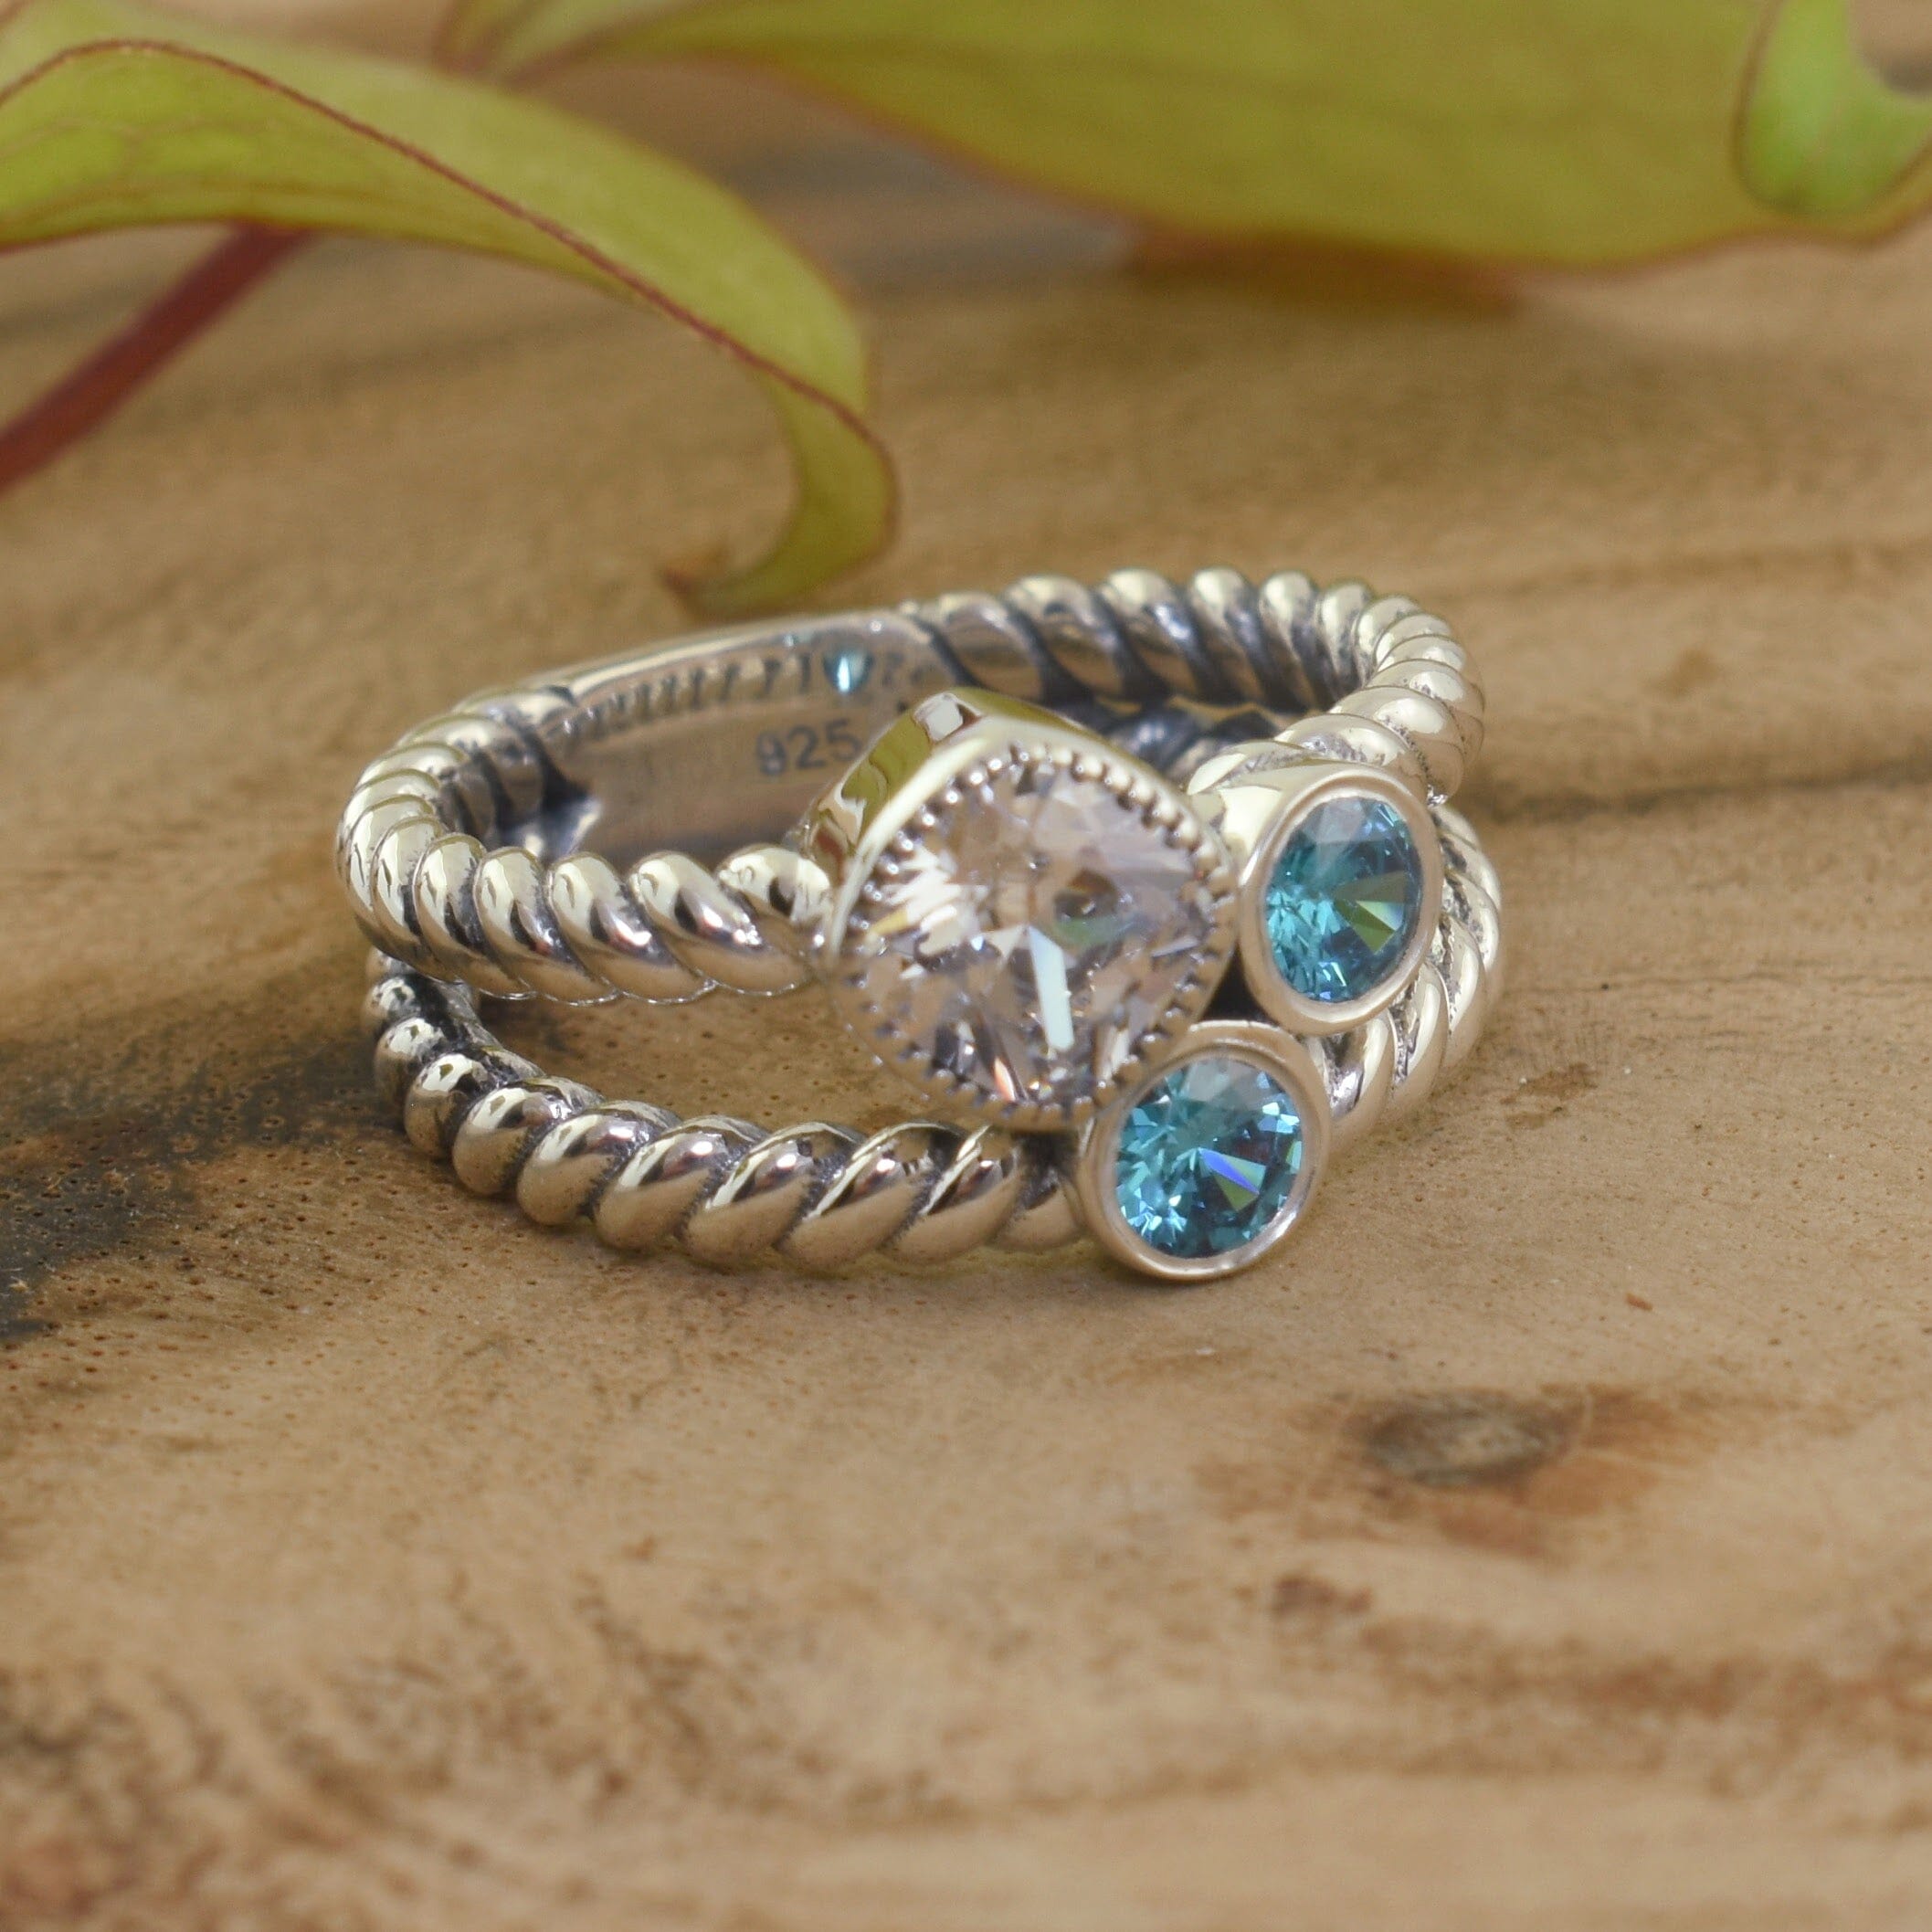 .925 sterling silver ring with clear and blue bezel set cz stones